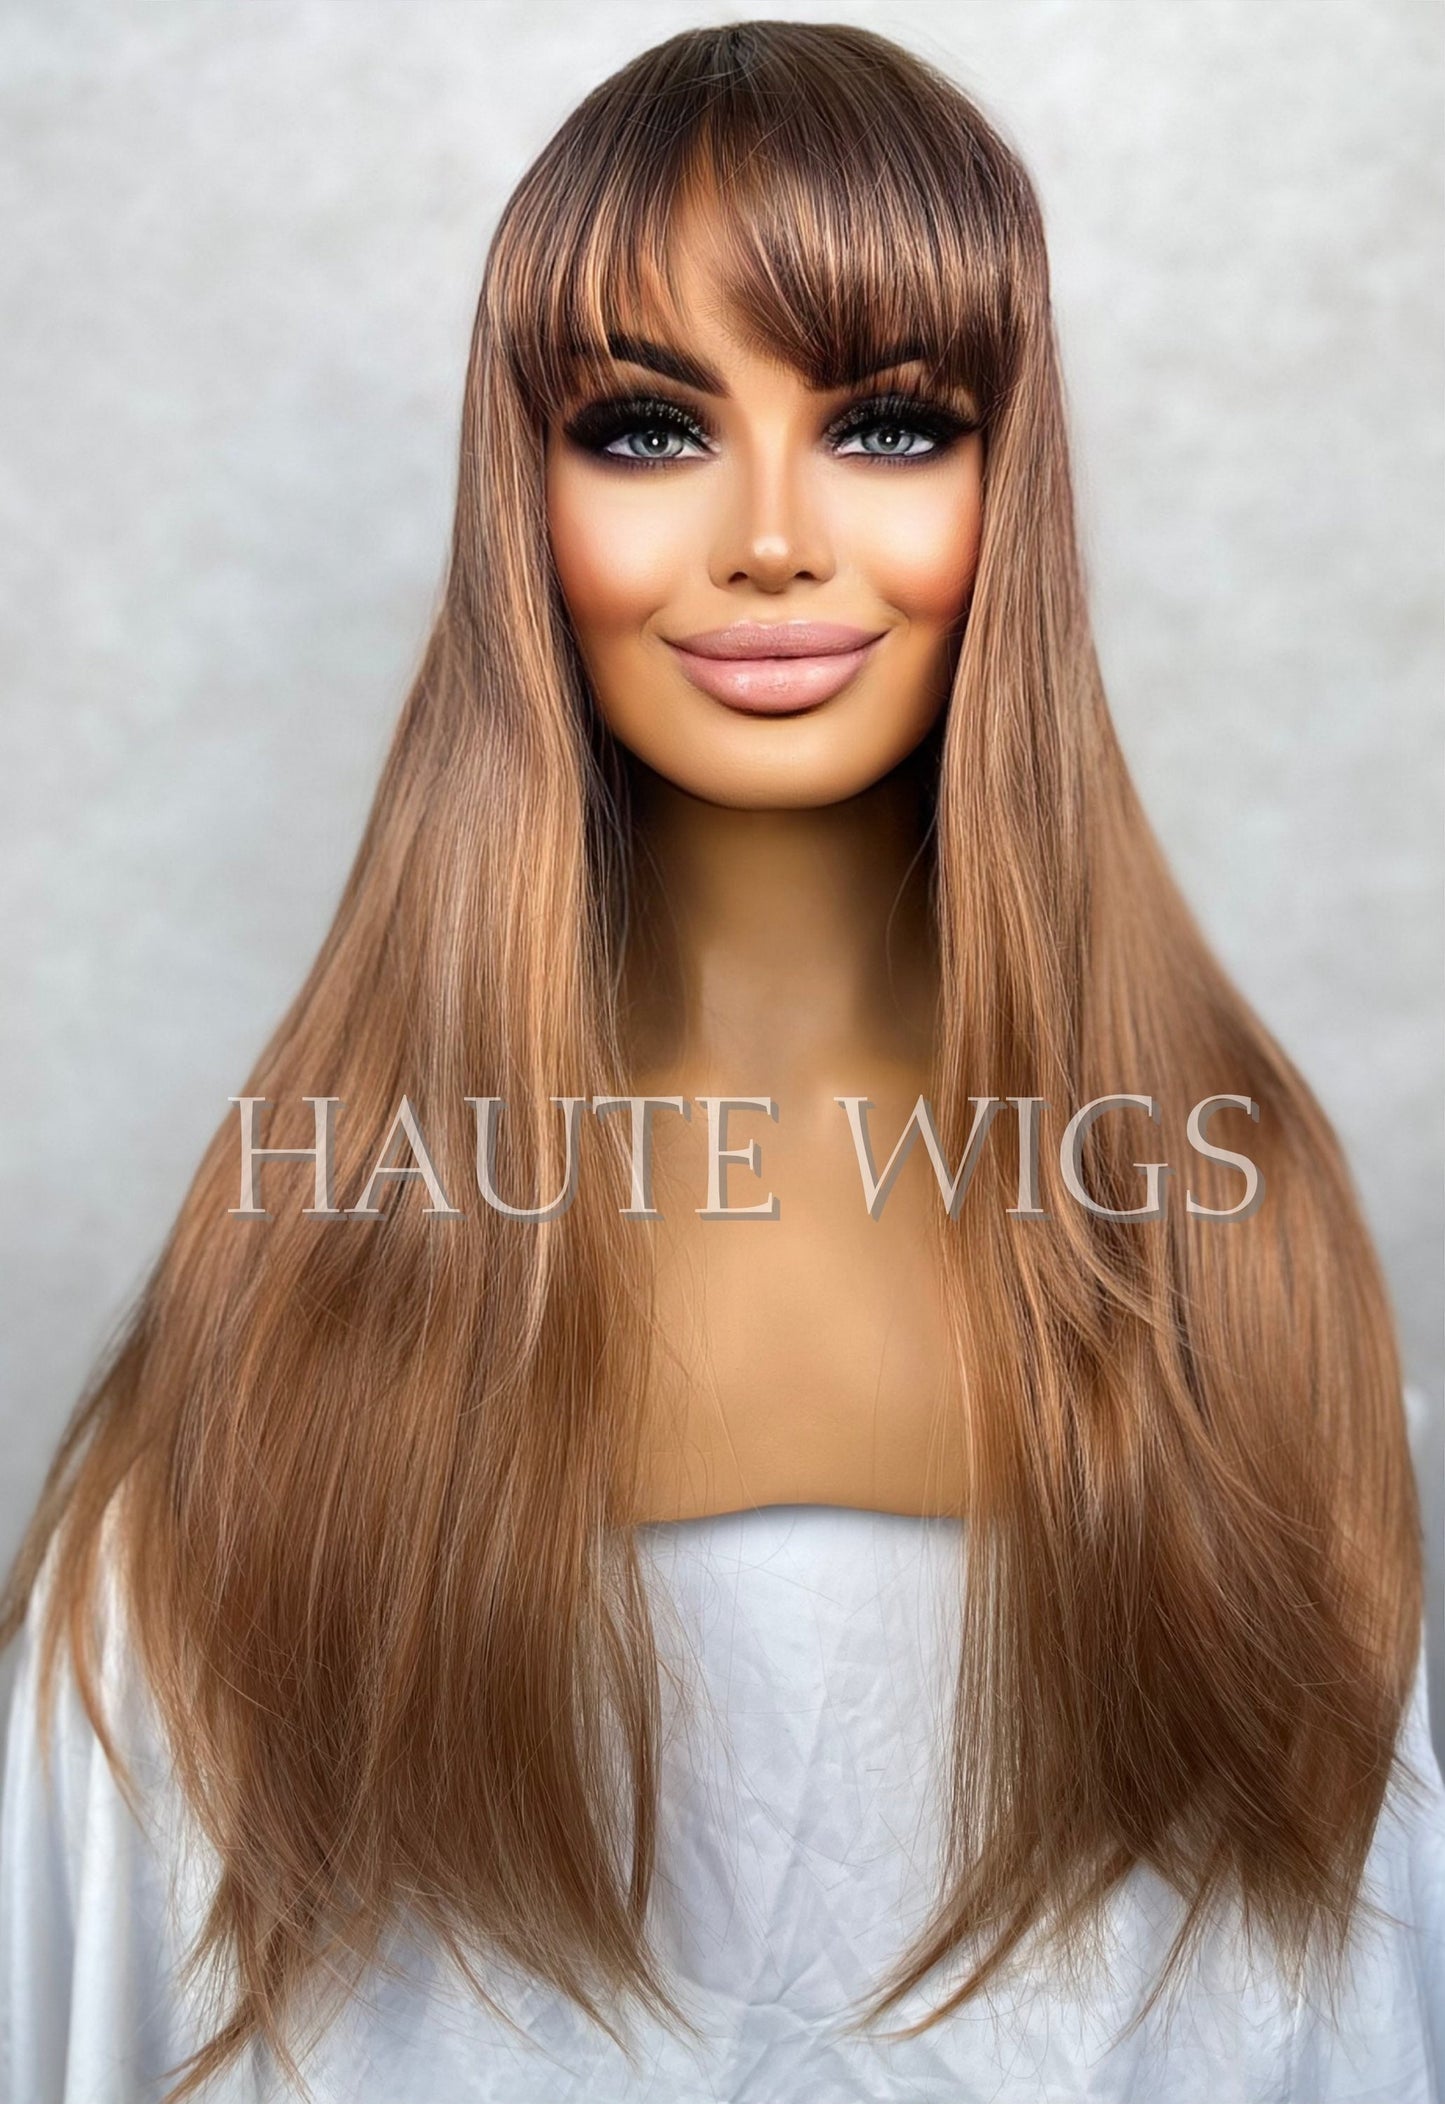 COPPER FEEL - AUBURN Ginger Rose Gold Straight Long Wig Womens Synthetic Hair 26 Inches Fringe Bangs Ladies Wigs Role Play Sexy Gift For Her